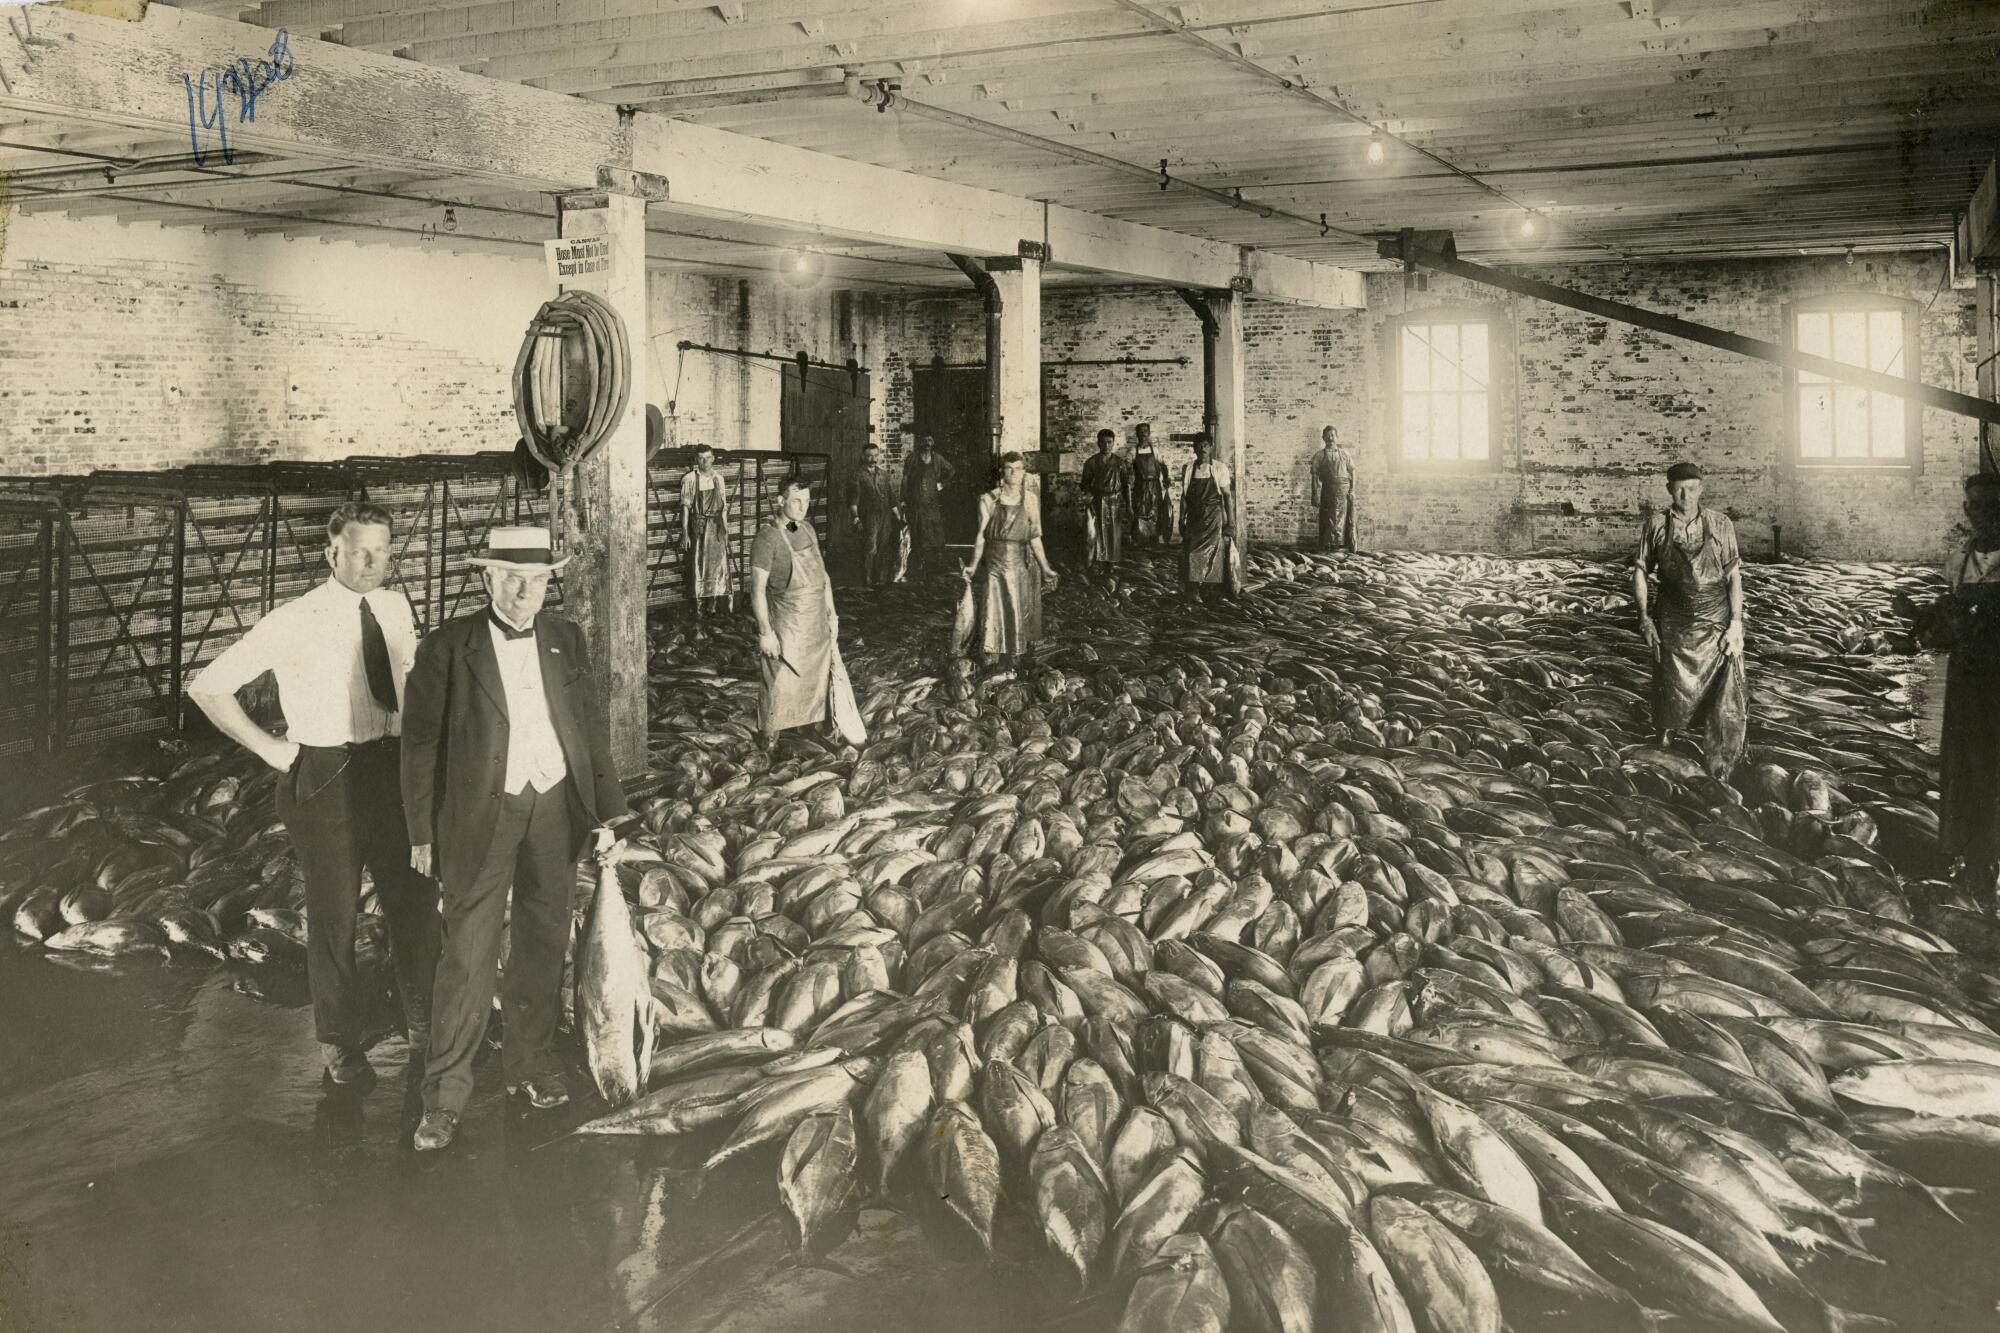 Hundreds of albacore tuna pile up across a cannery floor as workers in aprons look on.